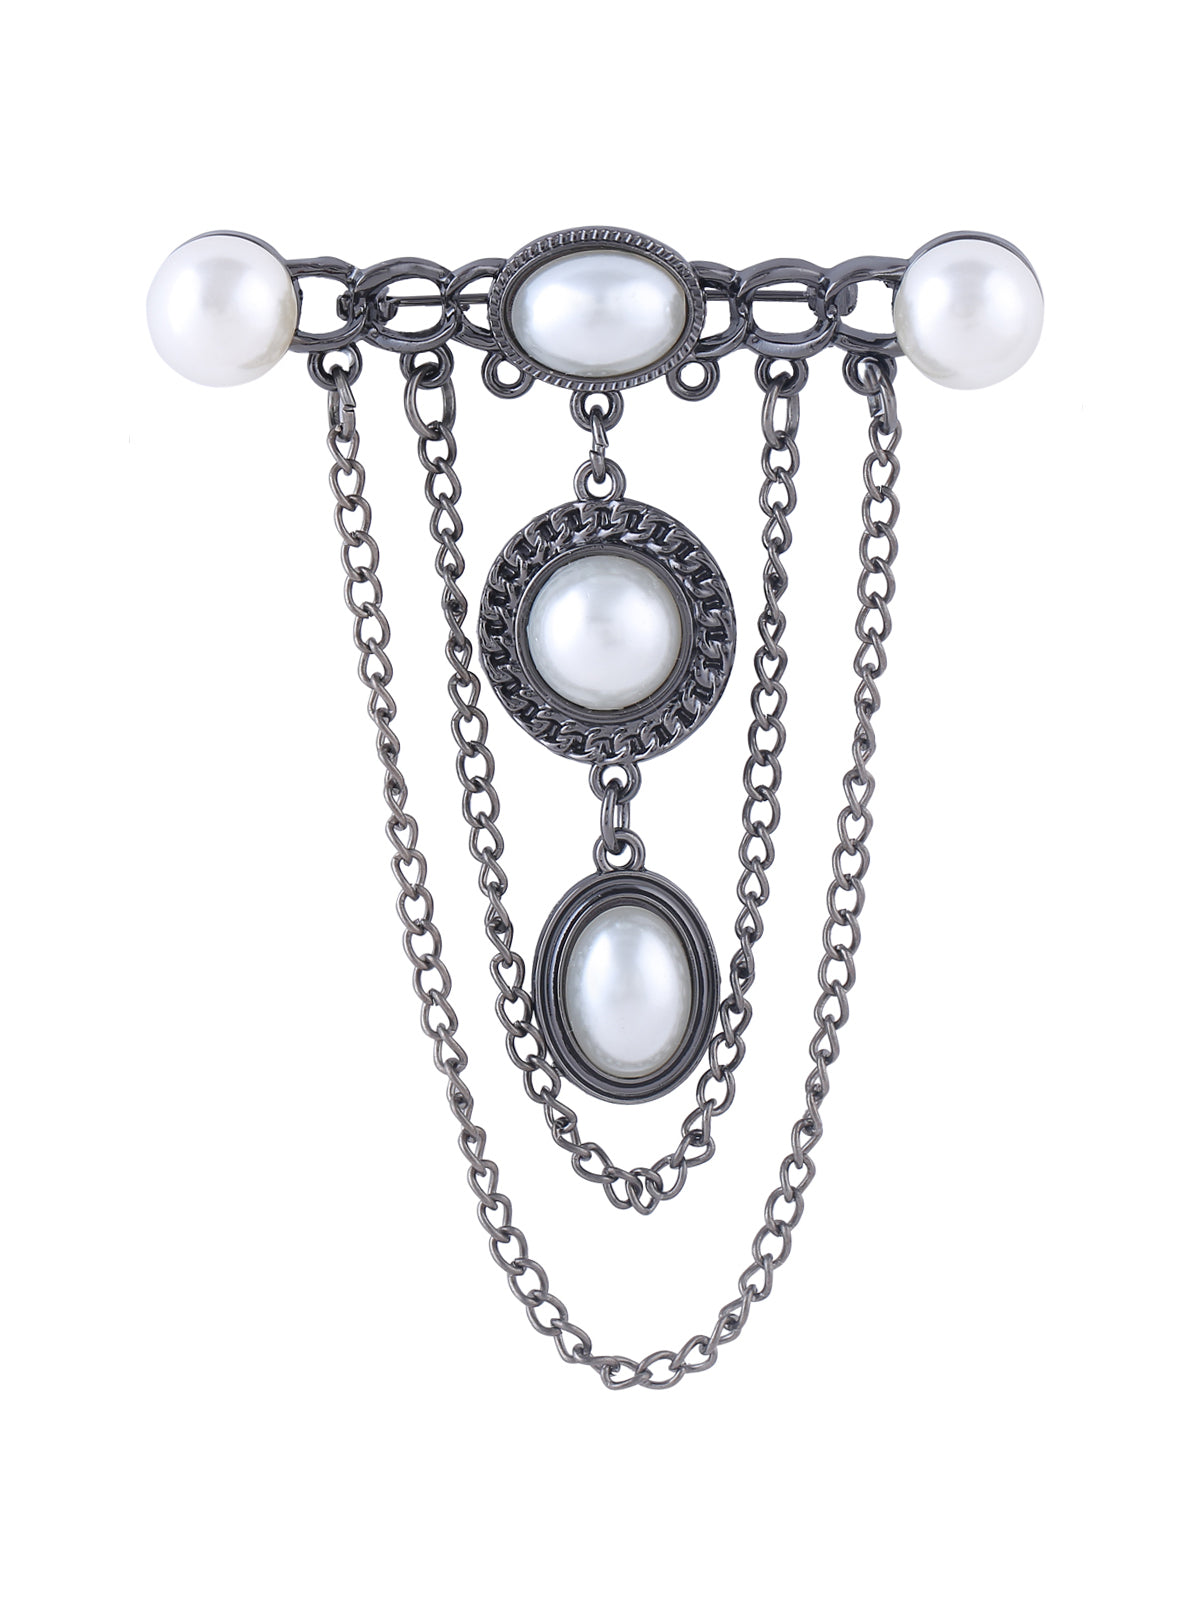 Classic Vintage Pearl & Chain Hanging Brooch